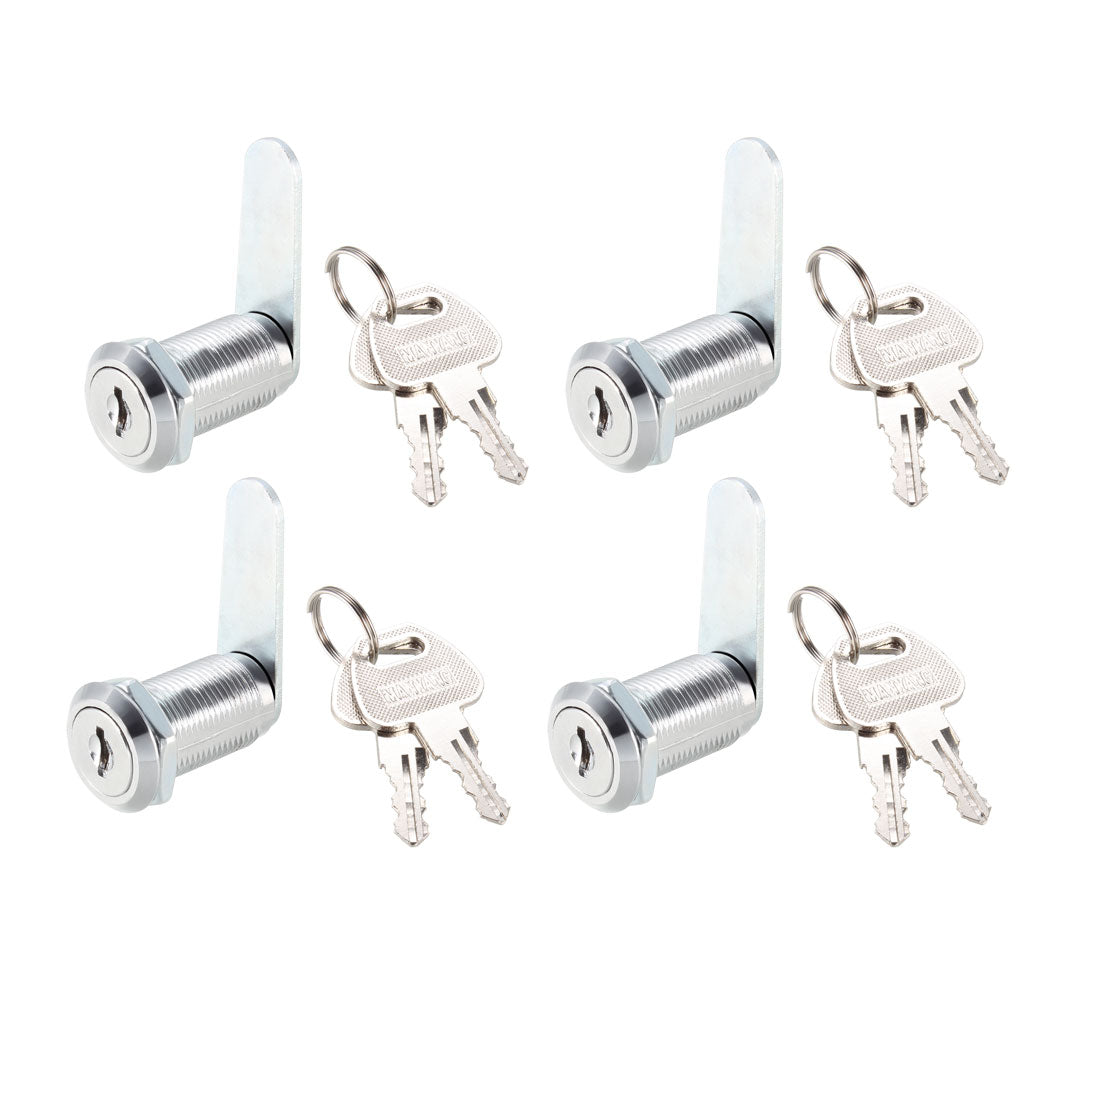 uxcell Uxcell Cam Locks 30mm Cylinder Length Fits Max 7/8-inch Thick Panel Keyed Alike 4Pcs